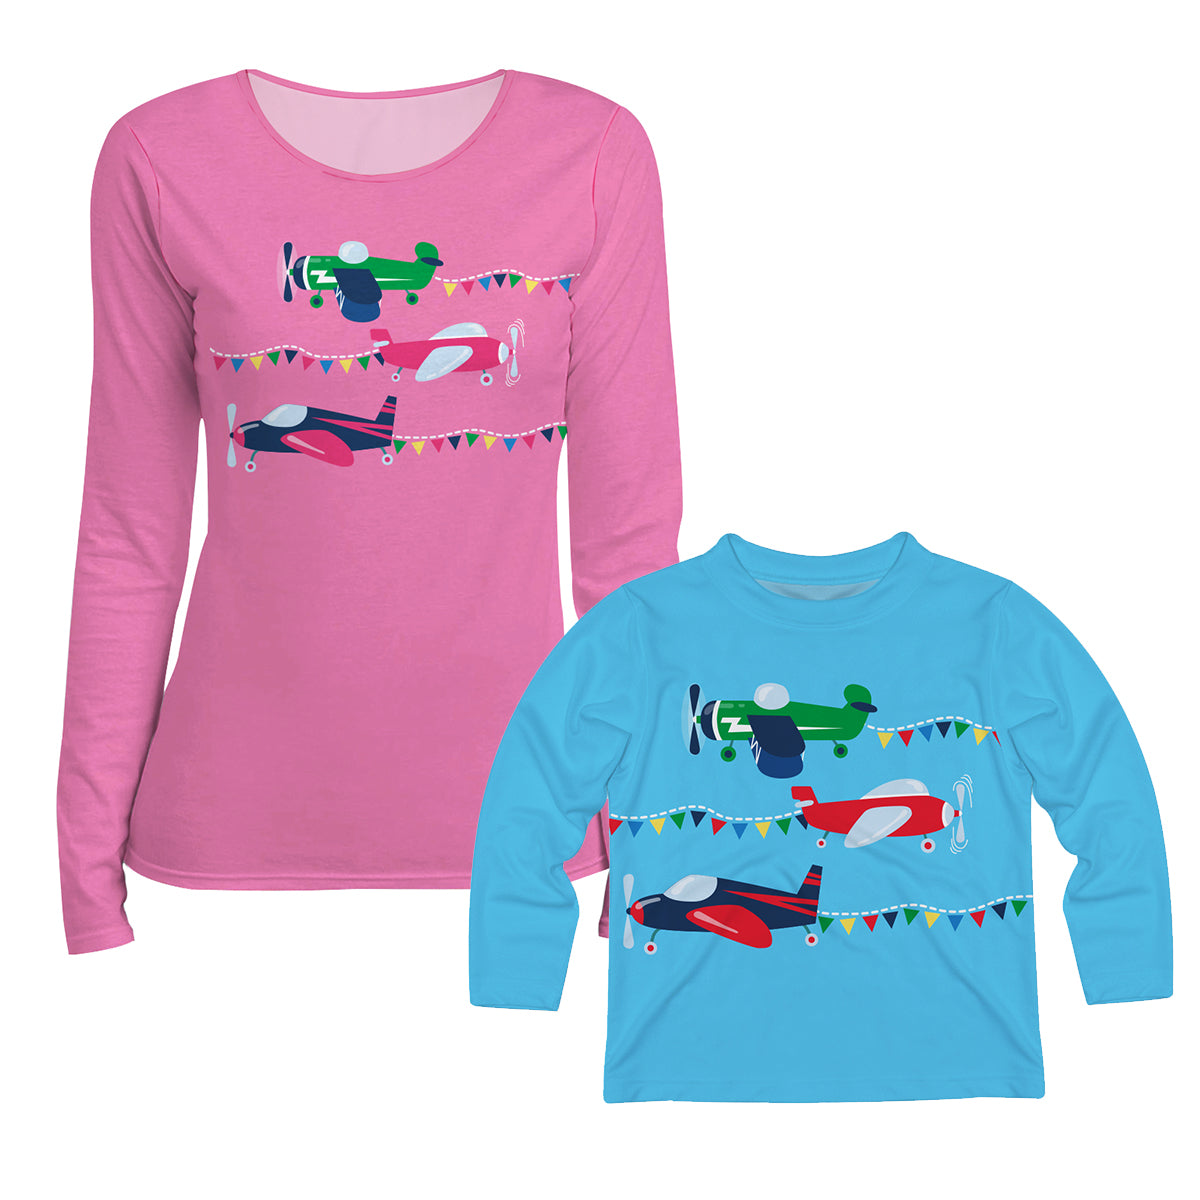 Airplanes Pink Long Sleeve Tee Shirt - Wimziy&Co.